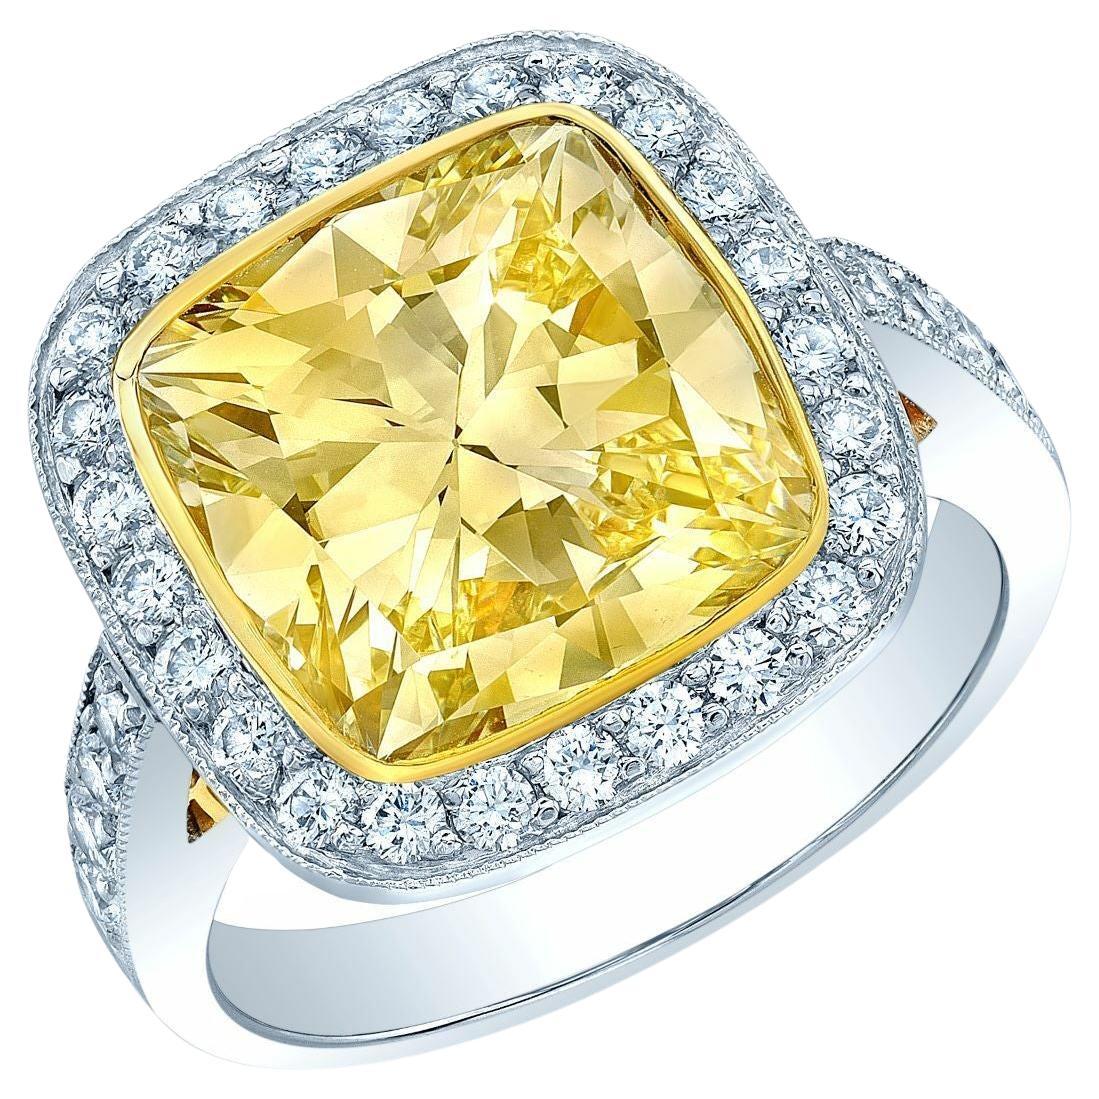 Platinum and 18 Karat Yellow Gold Engagement Ring with 1 Fancy Very Light Yellow Cushion Cut Diamond and Round Brilliant Diamonds: This ring incorporates both platinum and 18 karat yellow gold in its design. It features a fancy very light yellow